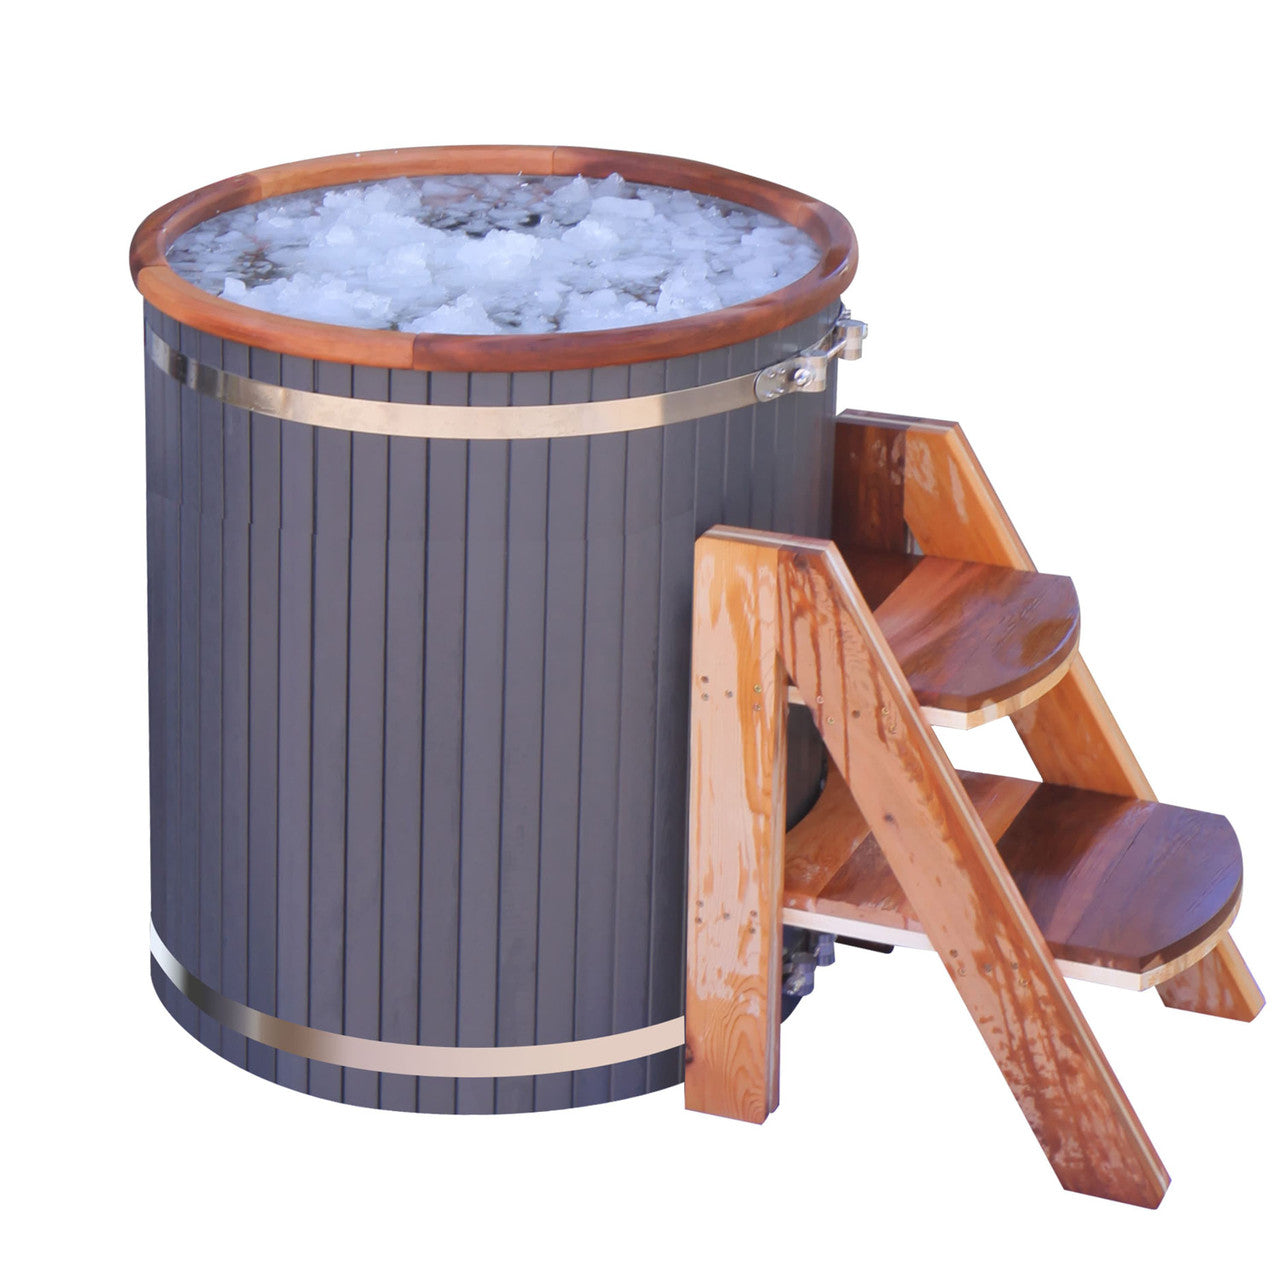 Aleko Outdoor Wooden Ice Bath Cold Plunge Tub | 118 Gallon Water Capacity | 33.5” x 31.5” RBCHTUB-AP - Serenity Provision